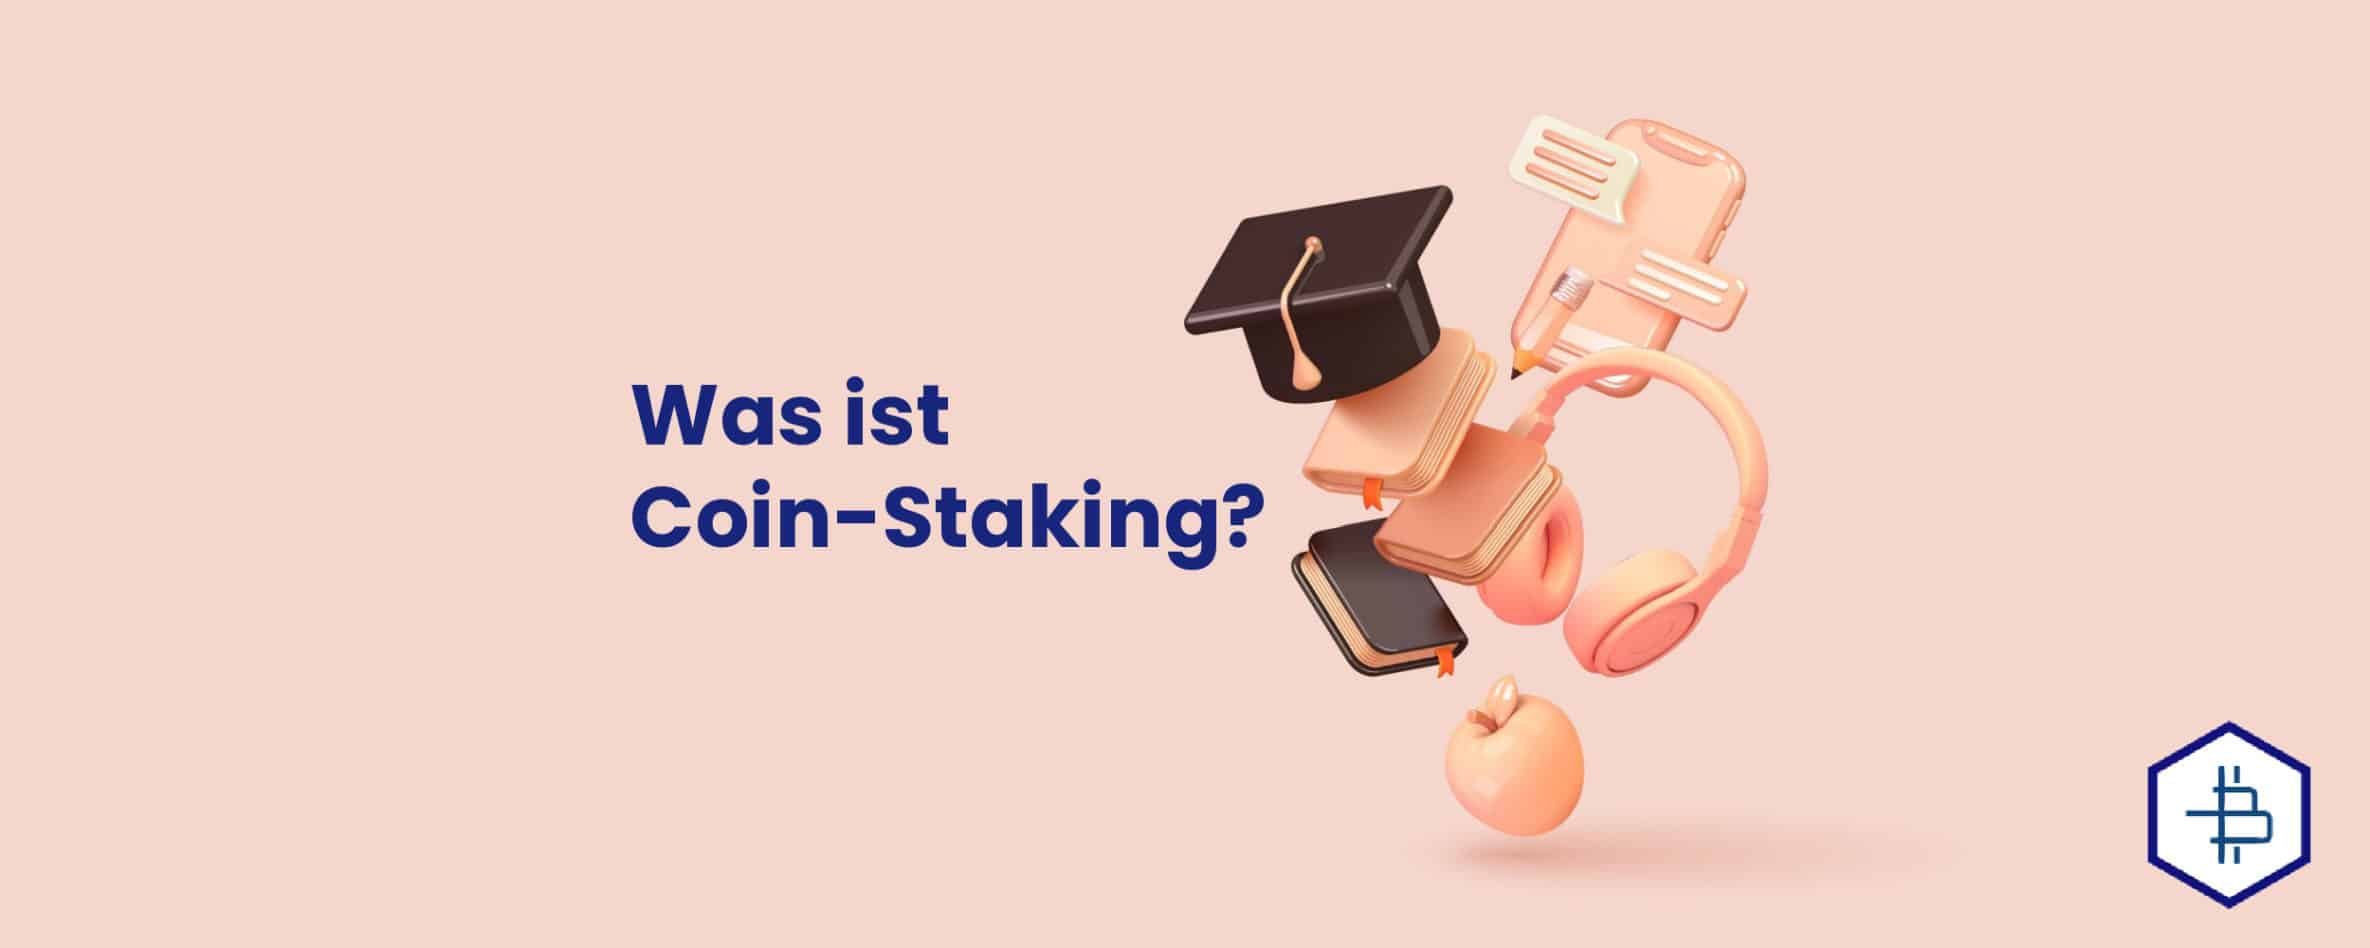 Was ist Coin-Staking